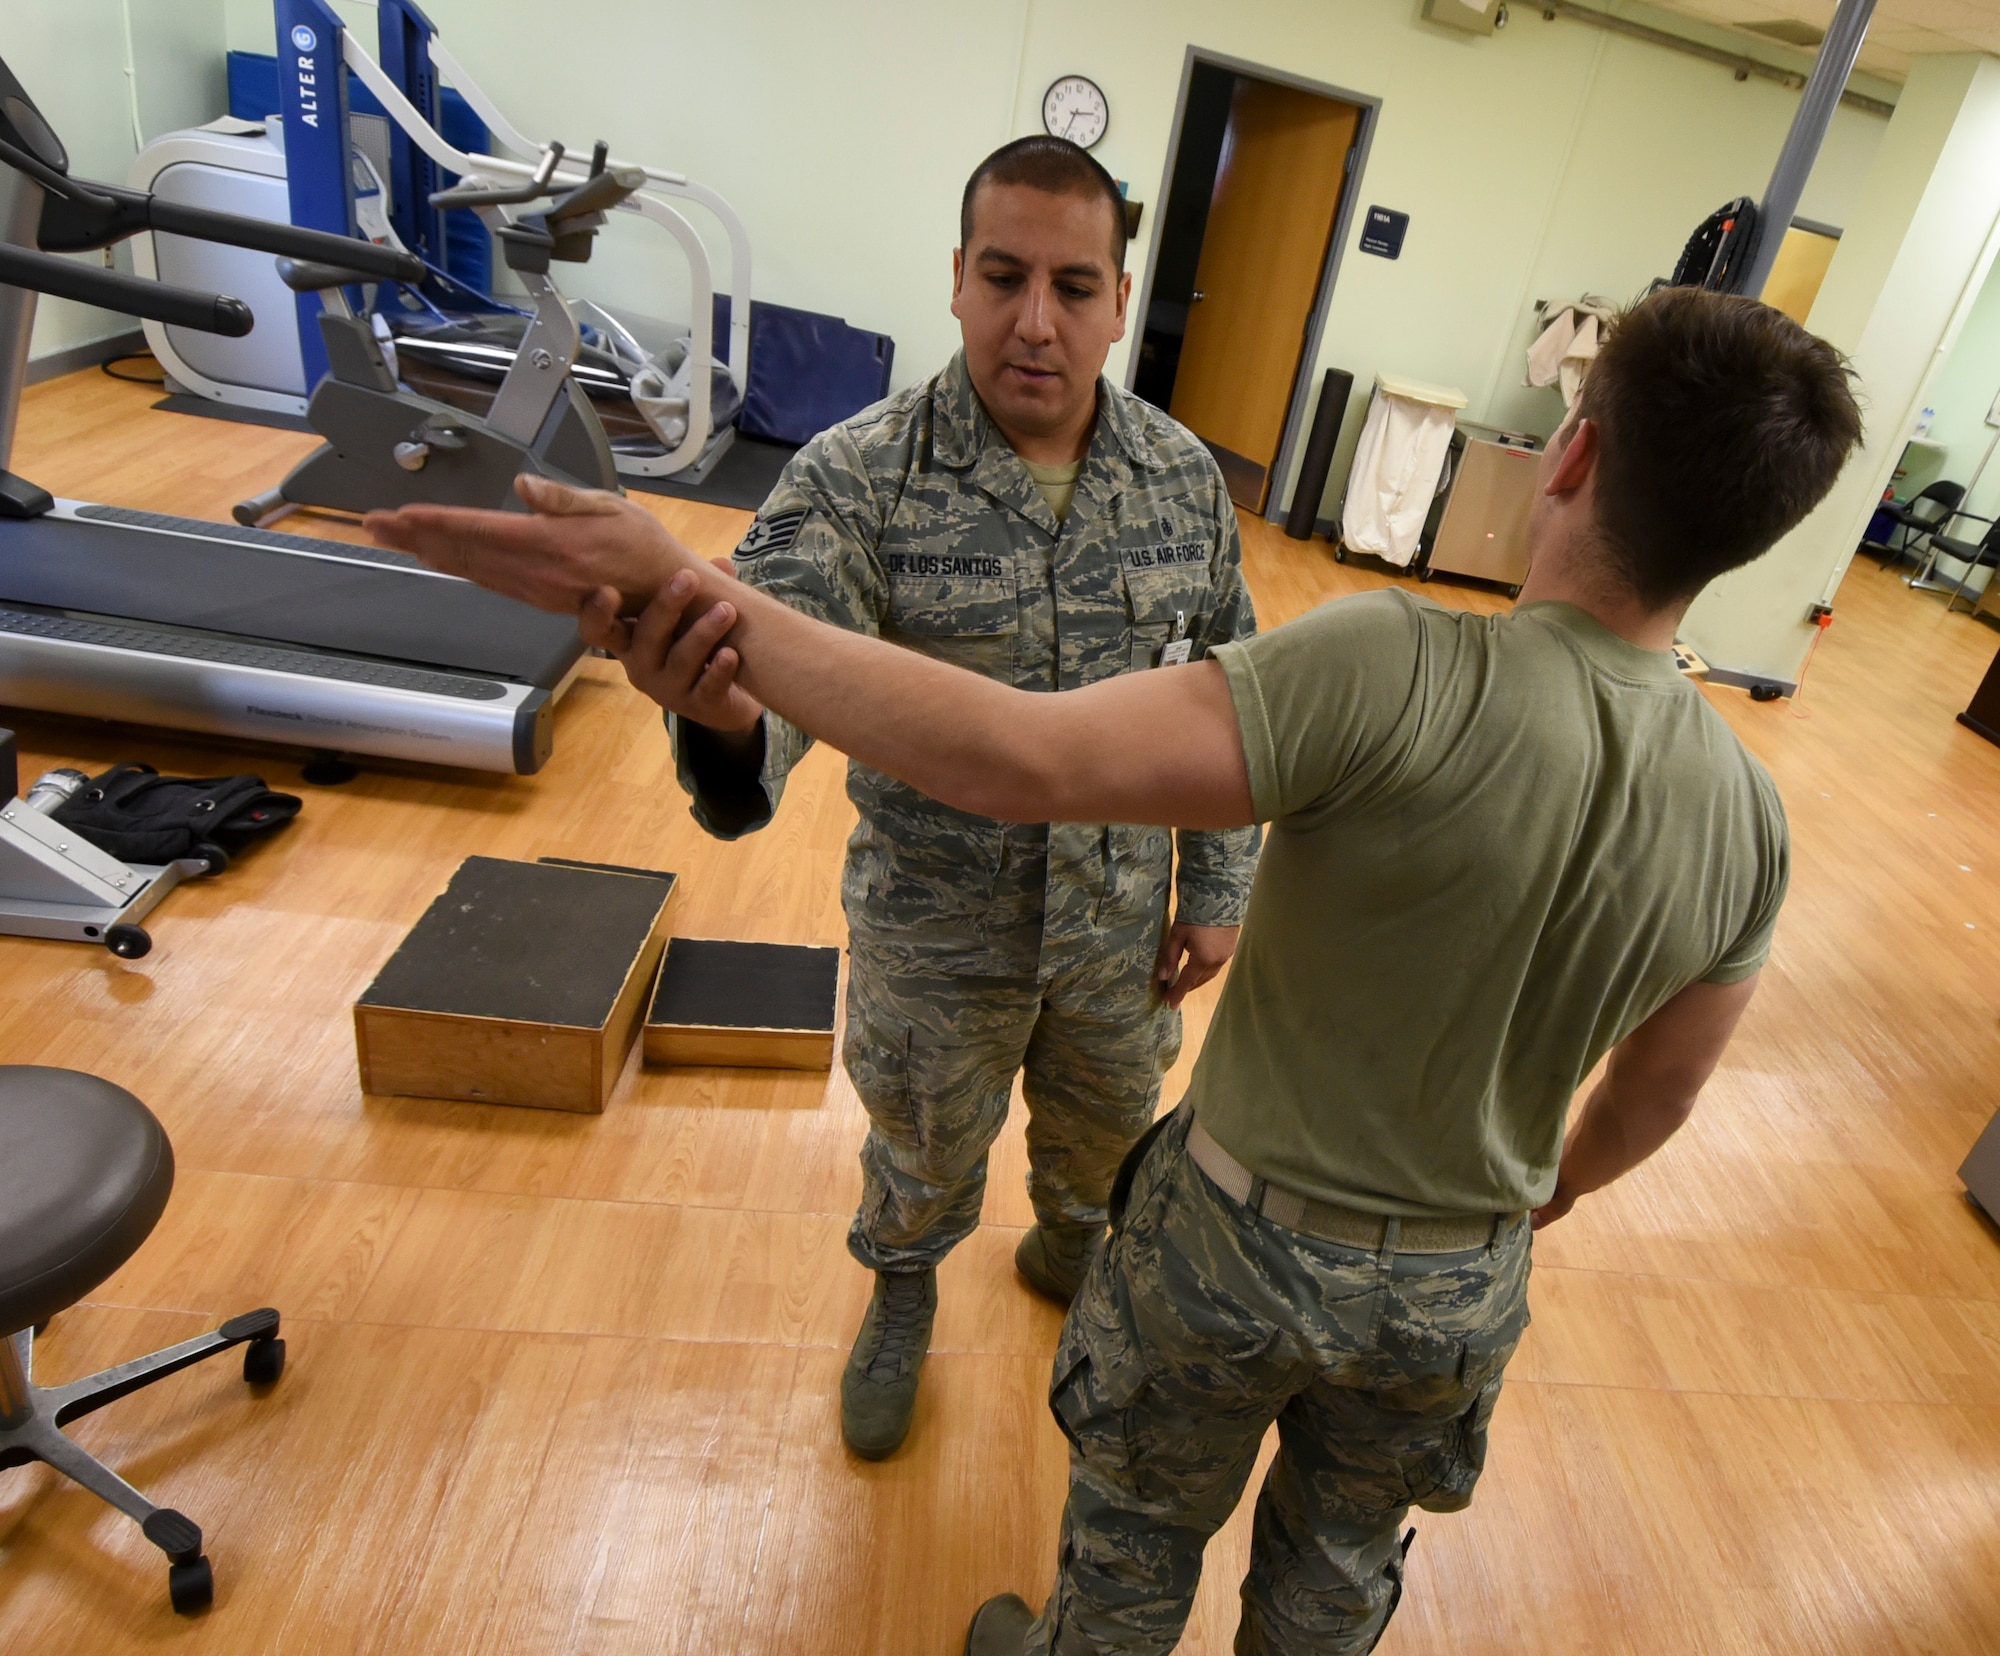 U.S. Air Force Staff Sgt. Pedro De Los Santos, 8th Medical Operations Squadron Physical Therapy noncommissioned officer in charge, assists Senior Airman Tyler Macmillan, 8th Logistics Readiness Squadron Material Handling Equipment maintenance journeyman, with elbow mobilization and nerve glide exercises during a physical therapy appointment at Kunsan Air Base, Republic of Korea, Feb. 13, 2017. De Los Santos ensures proper movement and function through rehabilitation of Macmillan’s arm, which was injured while lifting weights at the gym. (U.S. Air Force photo by Senior Airman Michael Hunsaker/Released)